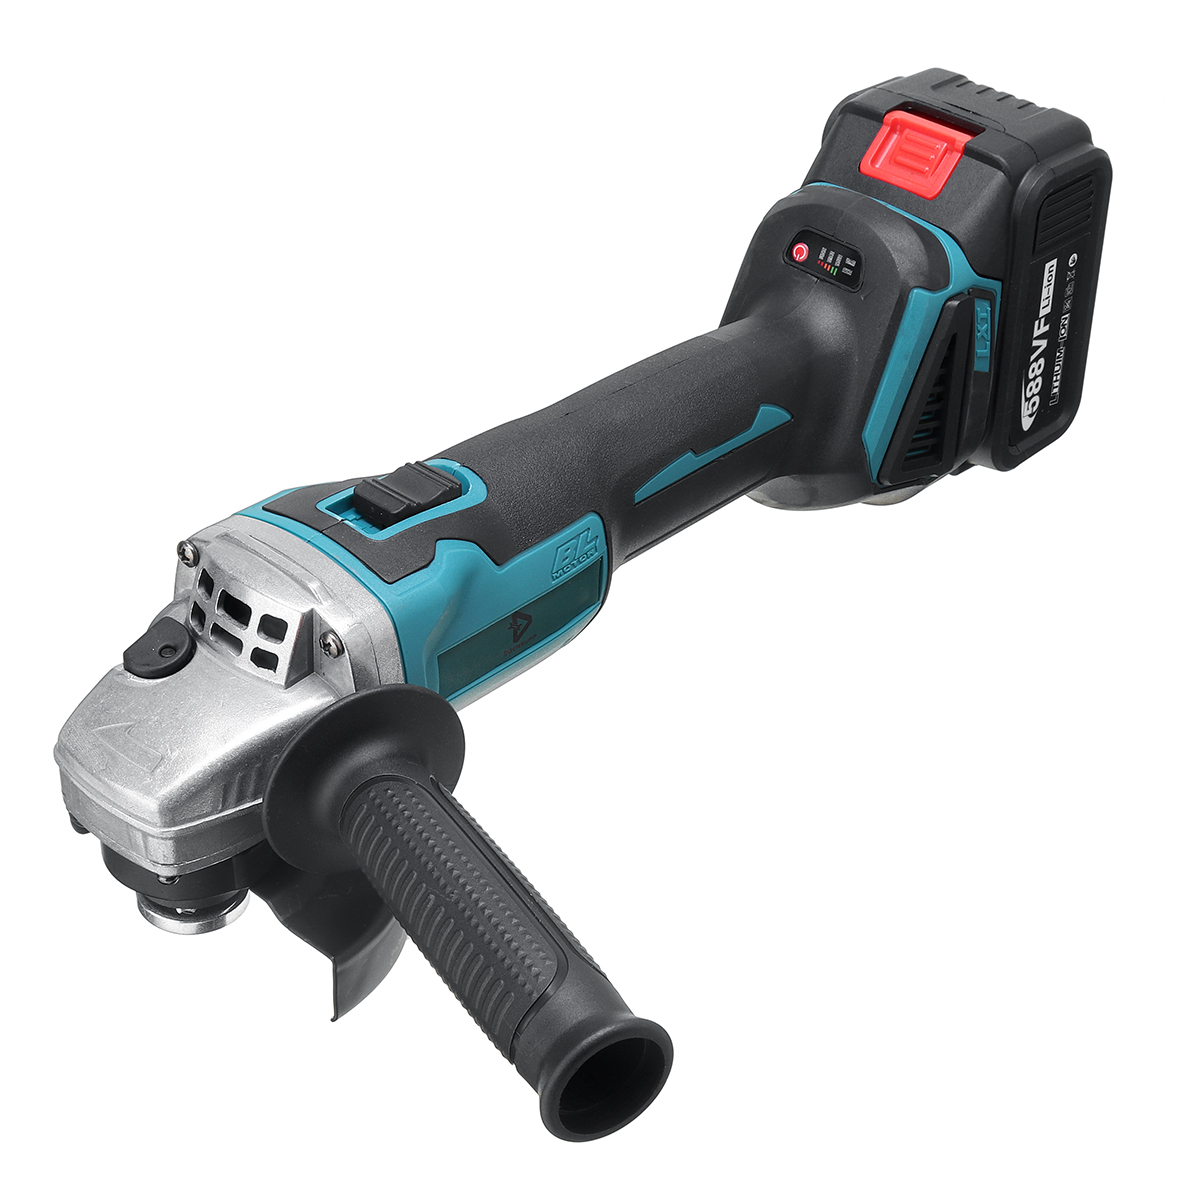 Find Doersupp 588VF 4Pcs Li ion Battery Power Tool Set Angle Grinder Cordless Drill Hammer Electric Wrench Fit Makita for Sale on Gipsybee.com with cryptocurrencies